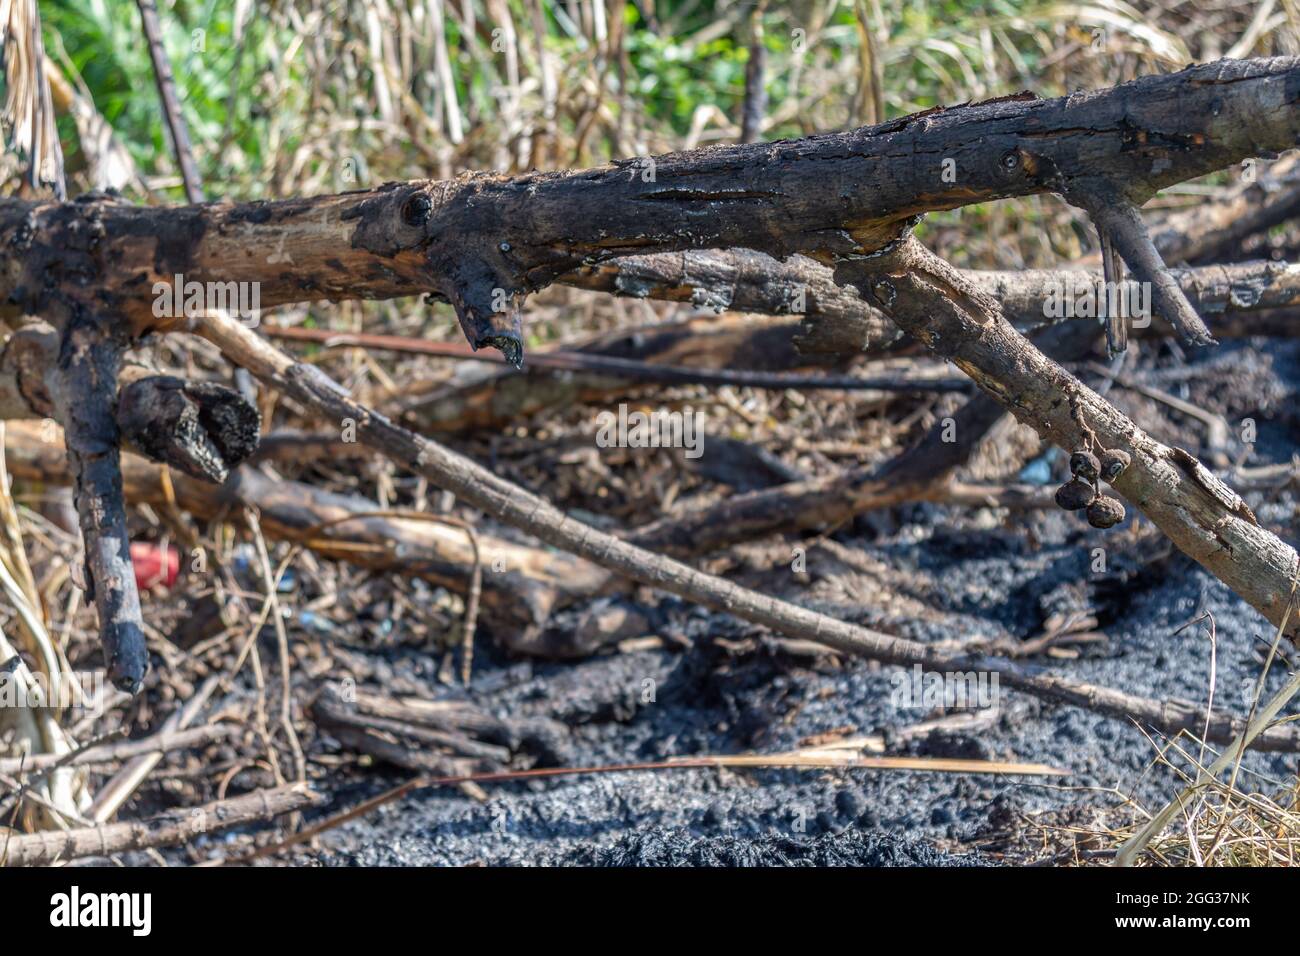 The residue from burning trees in the fields, as a result of productive activities in the agricultural sector, contributes to a small amount of pollut Stock Photo